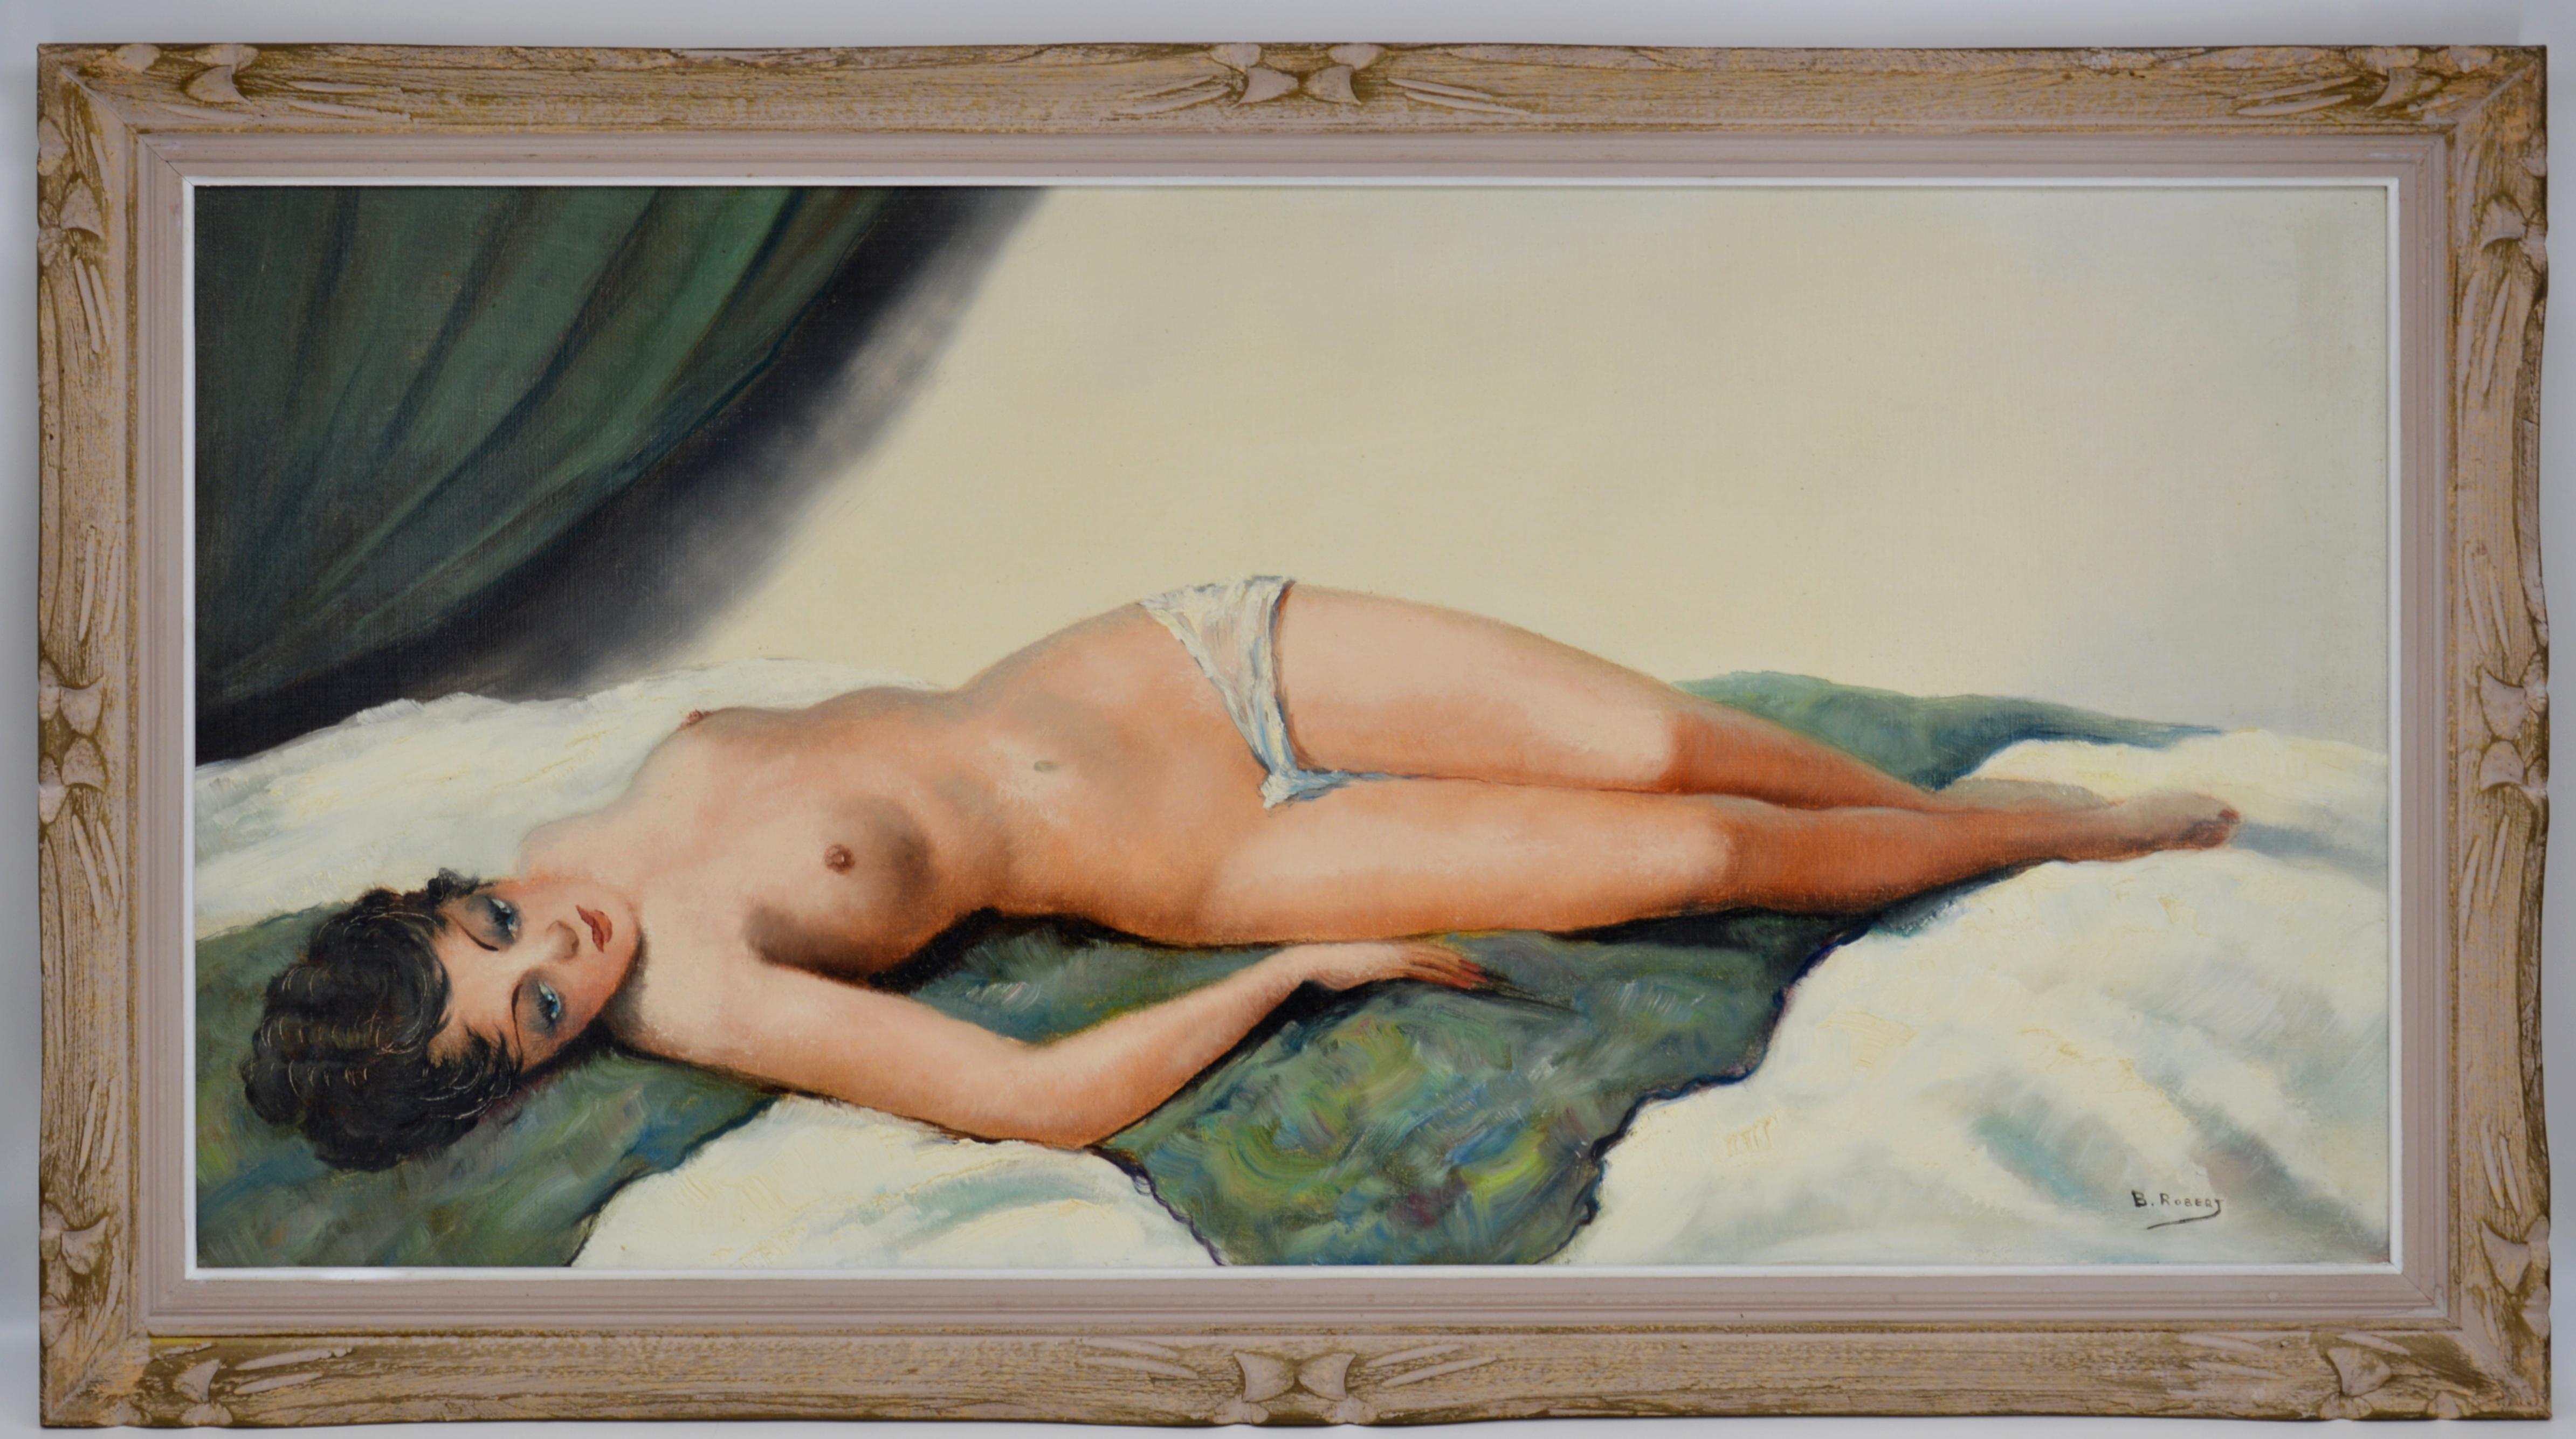 B. Robert Nude Painting - Nude, Oil on Canvas by B.Robert, Ca. 1930